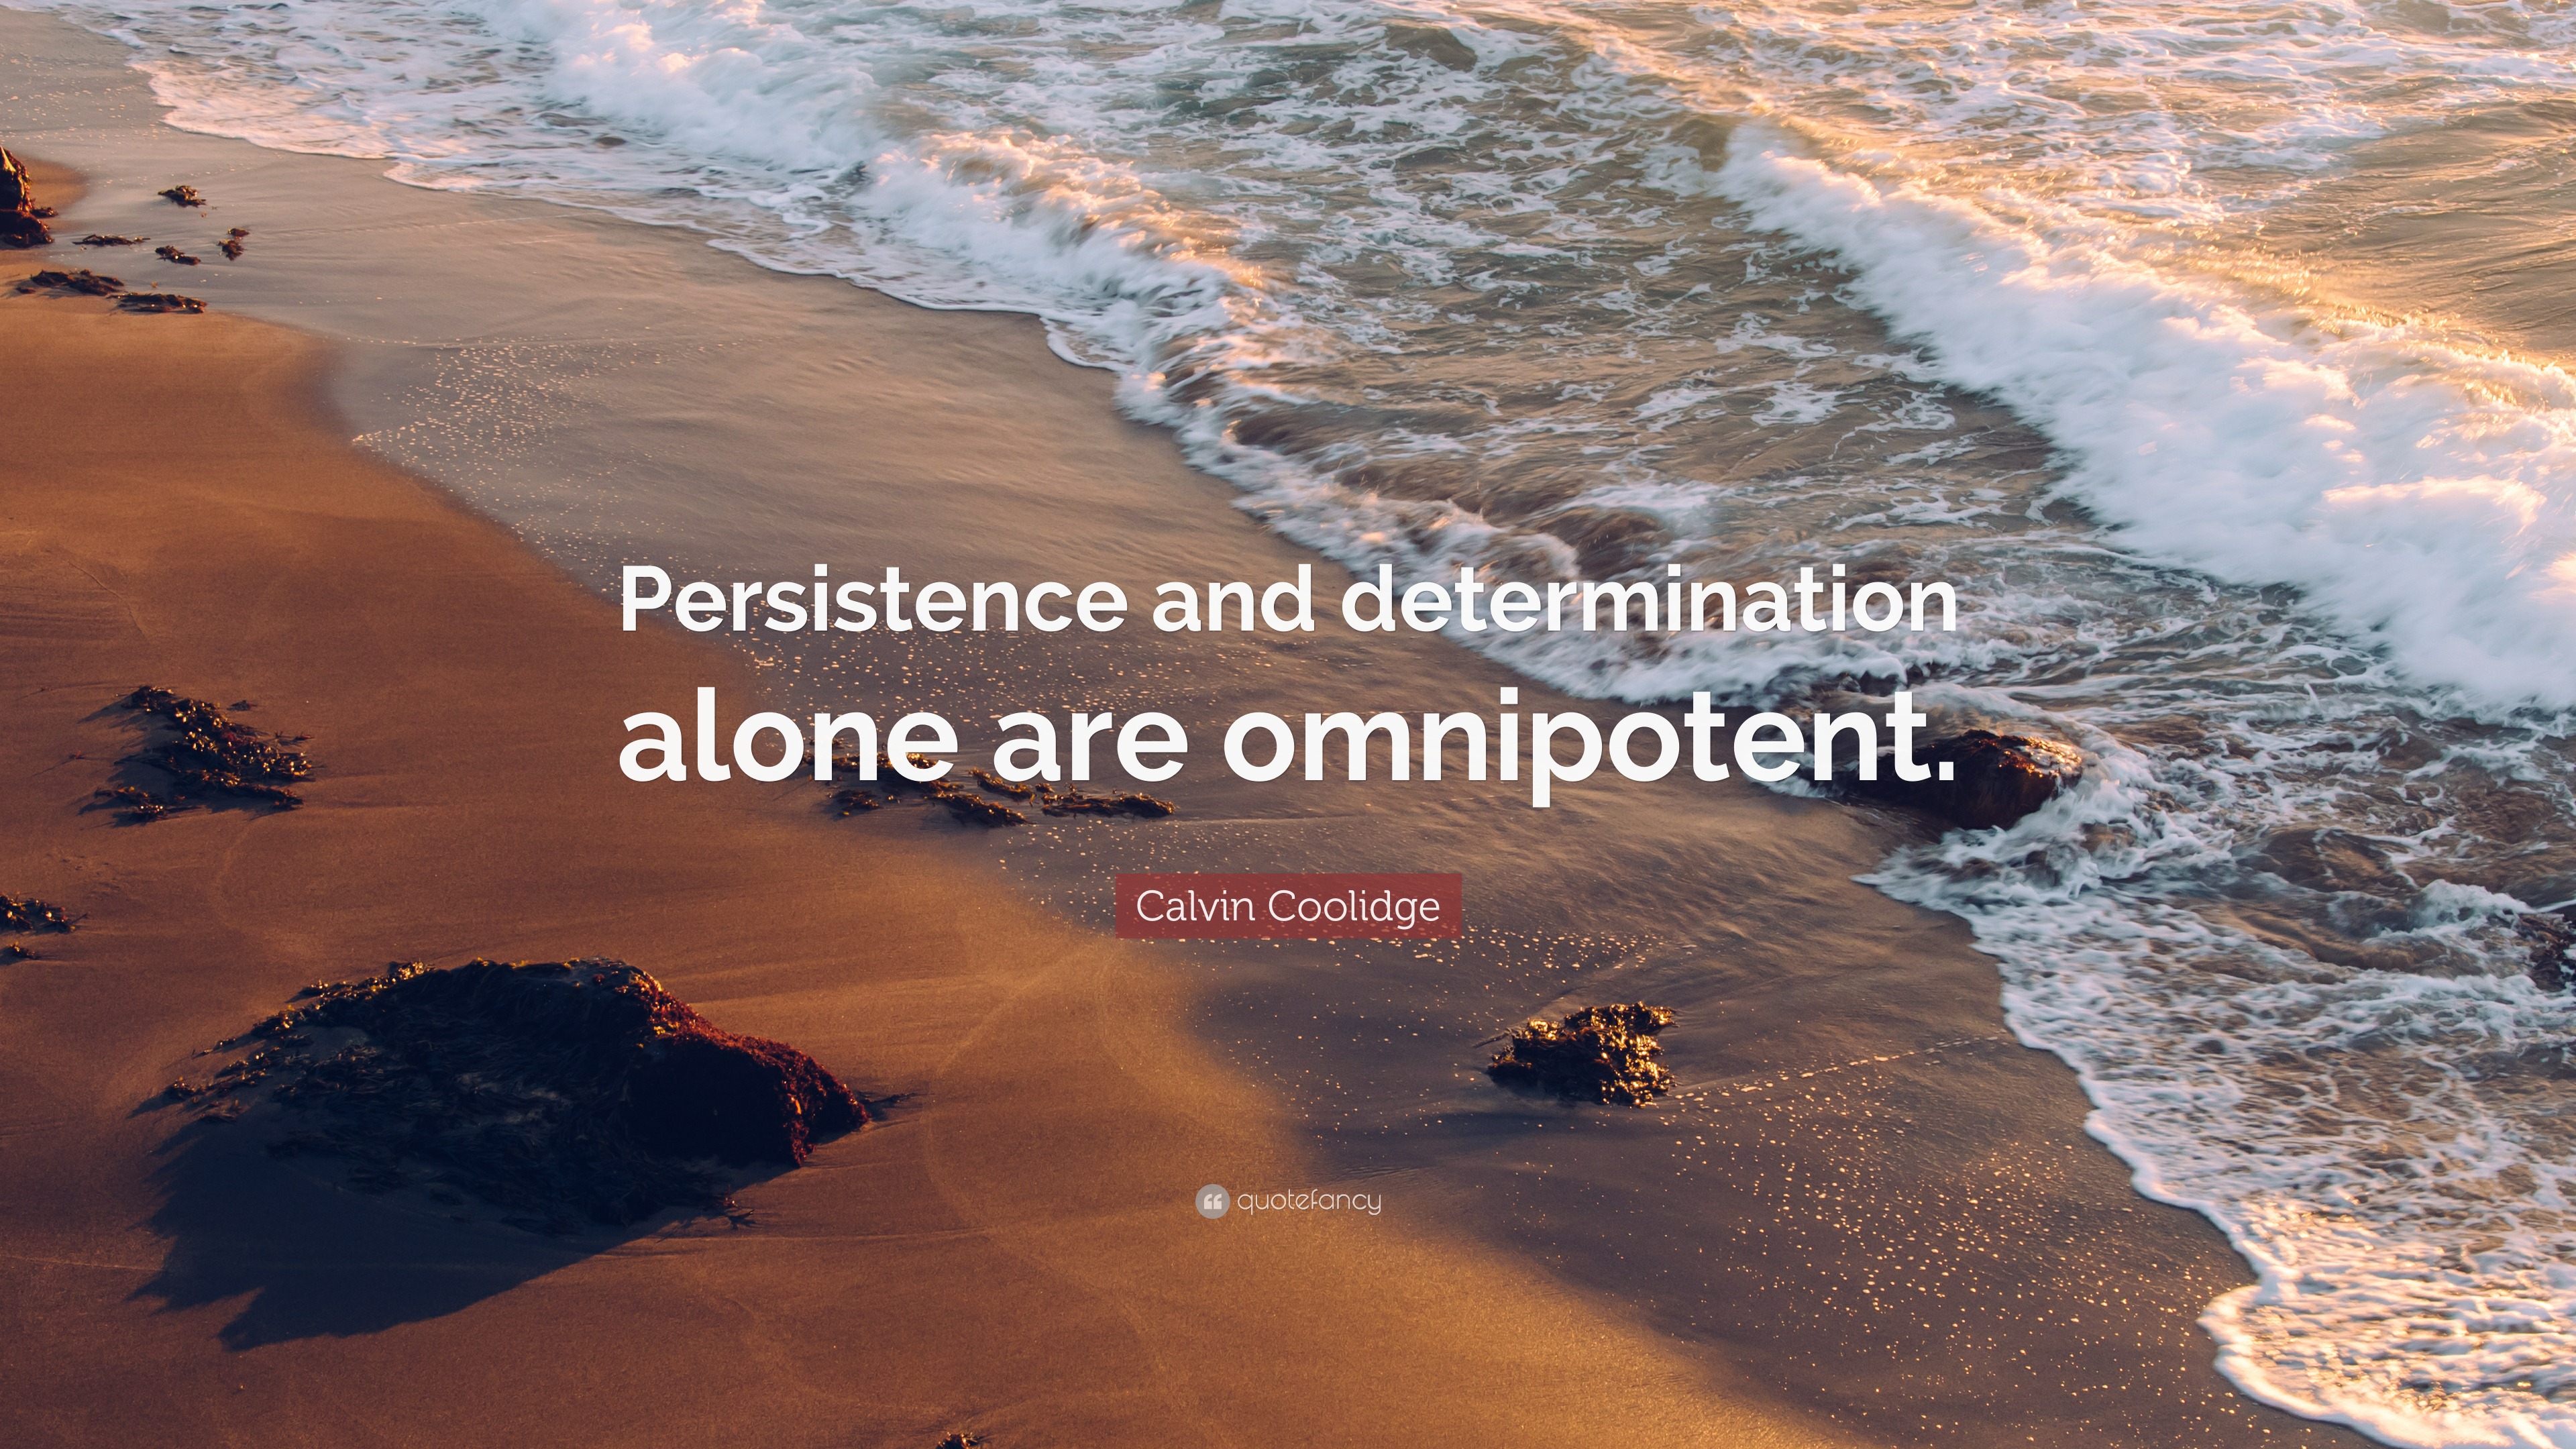 2019378 Calvin Coolidge Quote Persistence and determination alone are